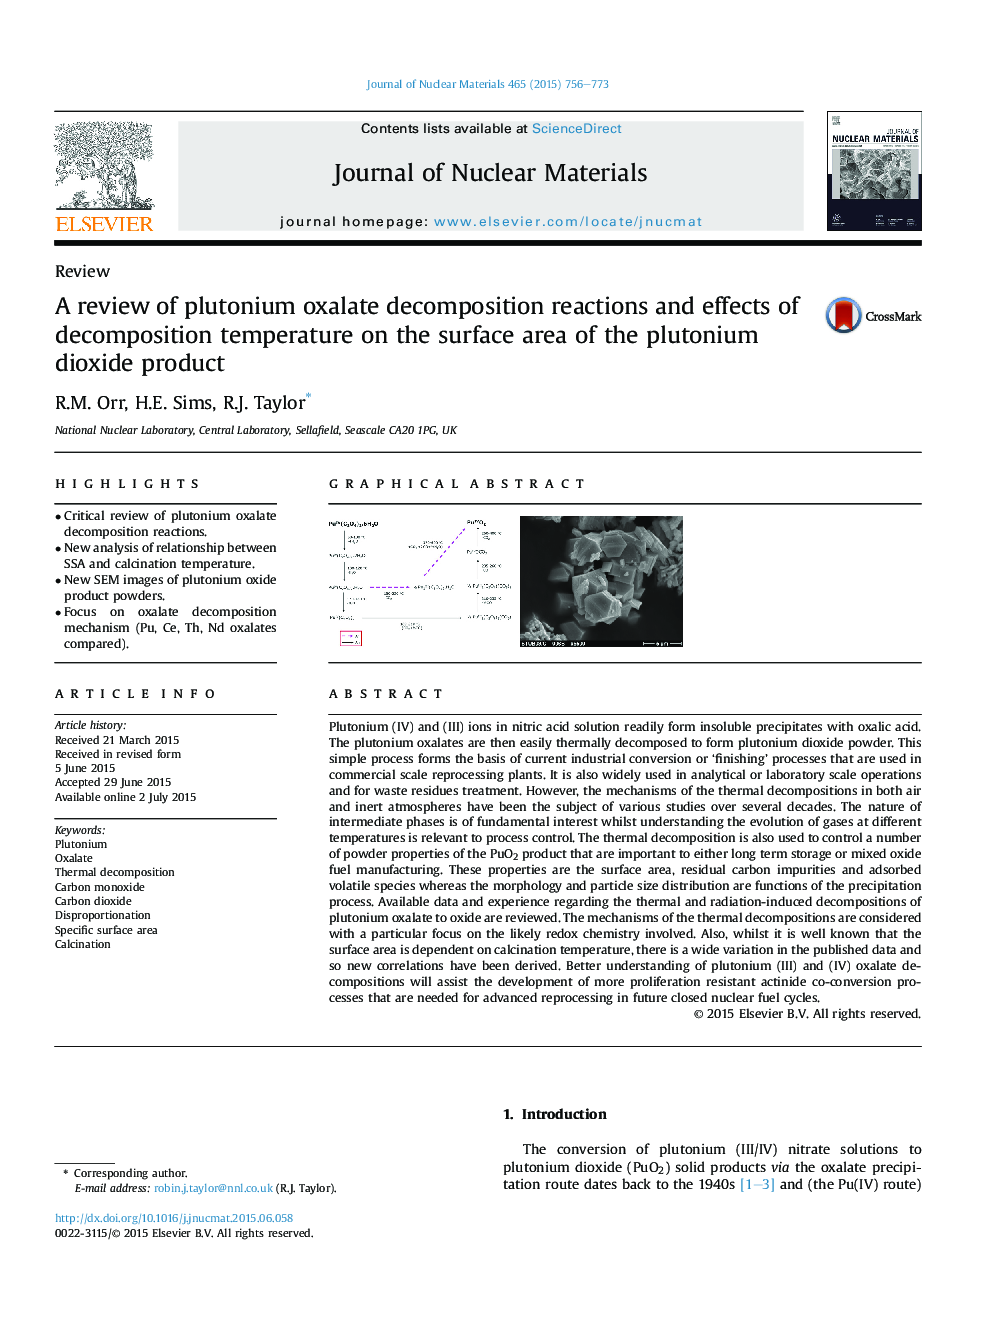 A review of plutonium oxalate decomposition reactions and effects of decomposition temperature on the surface area of the plutonium dioxide product